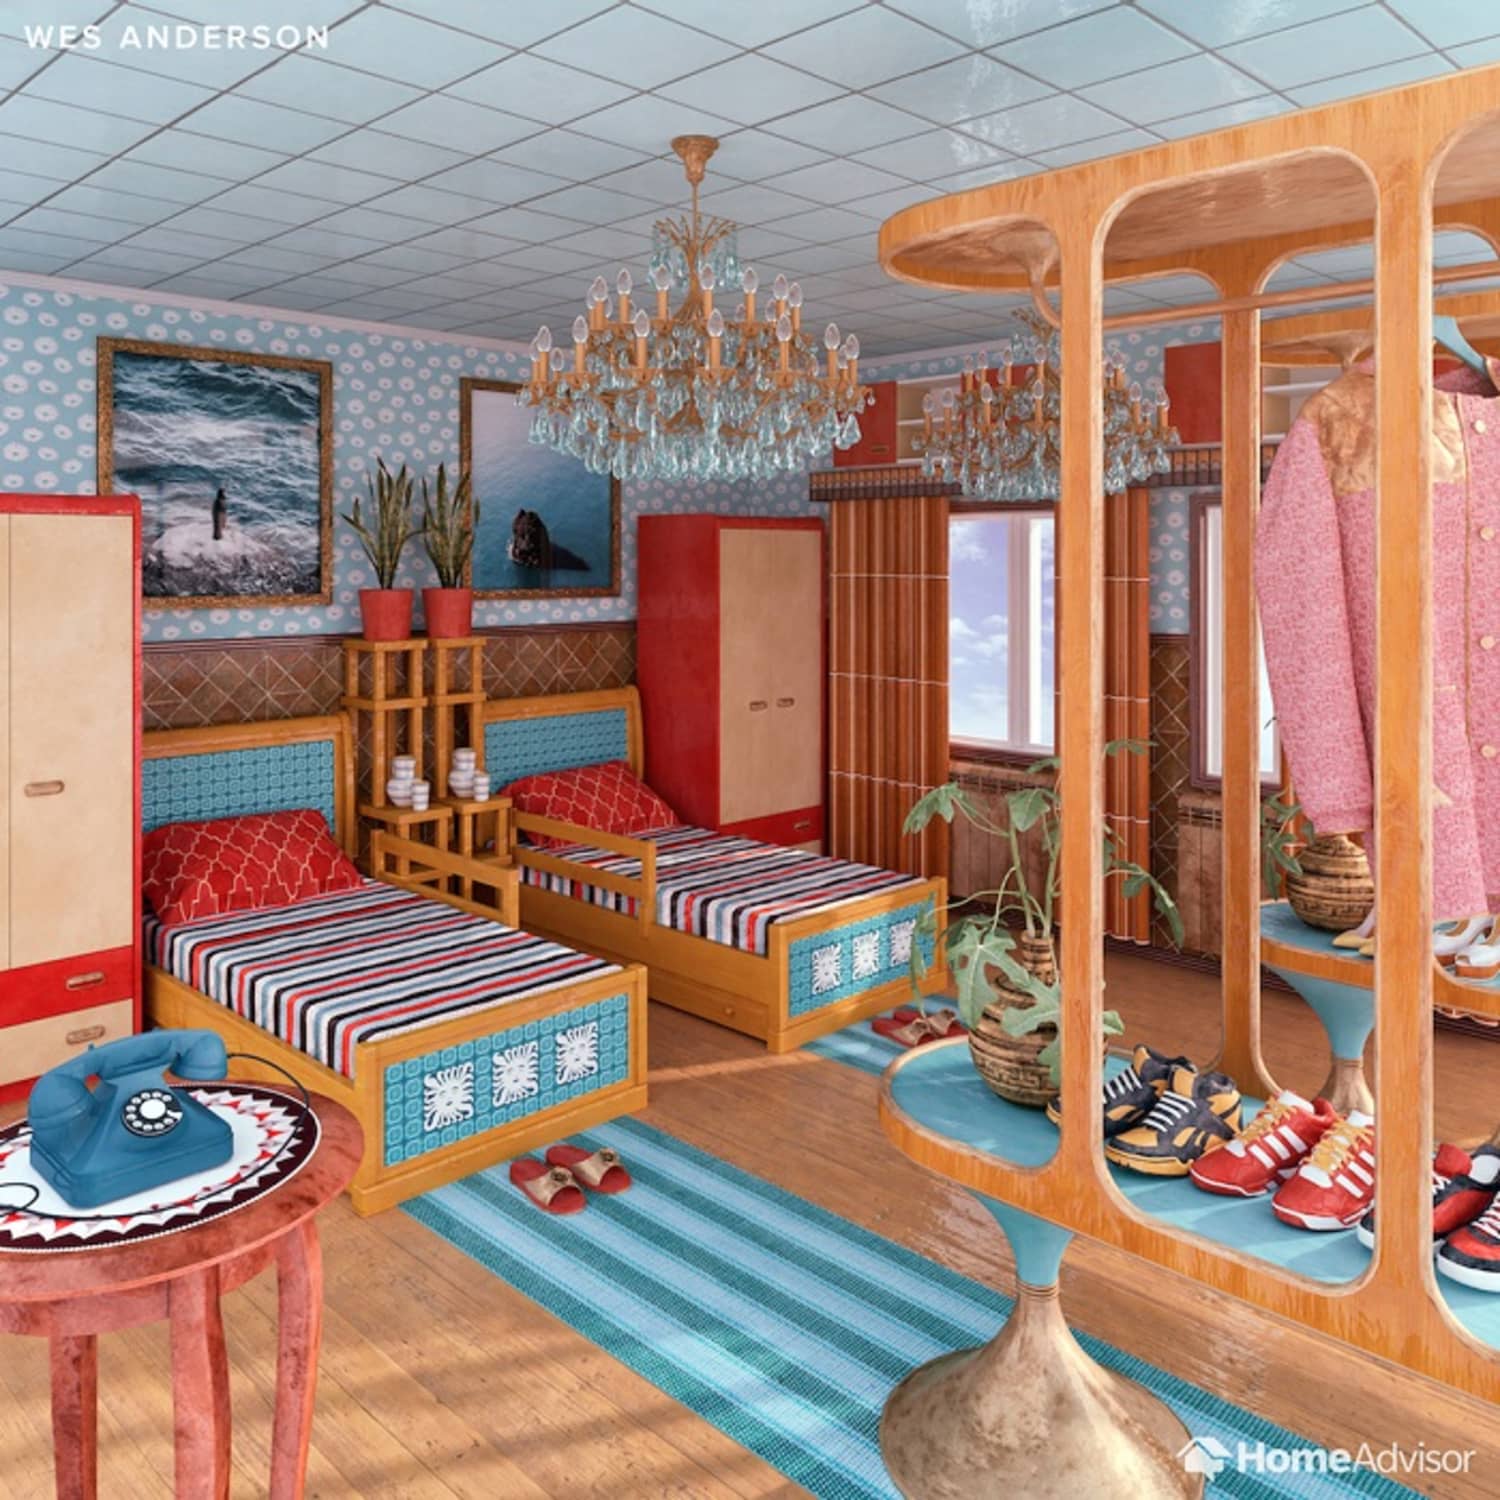 These 7 Fantasy Bedrooms Are Inspired By Wes Anderson Peter